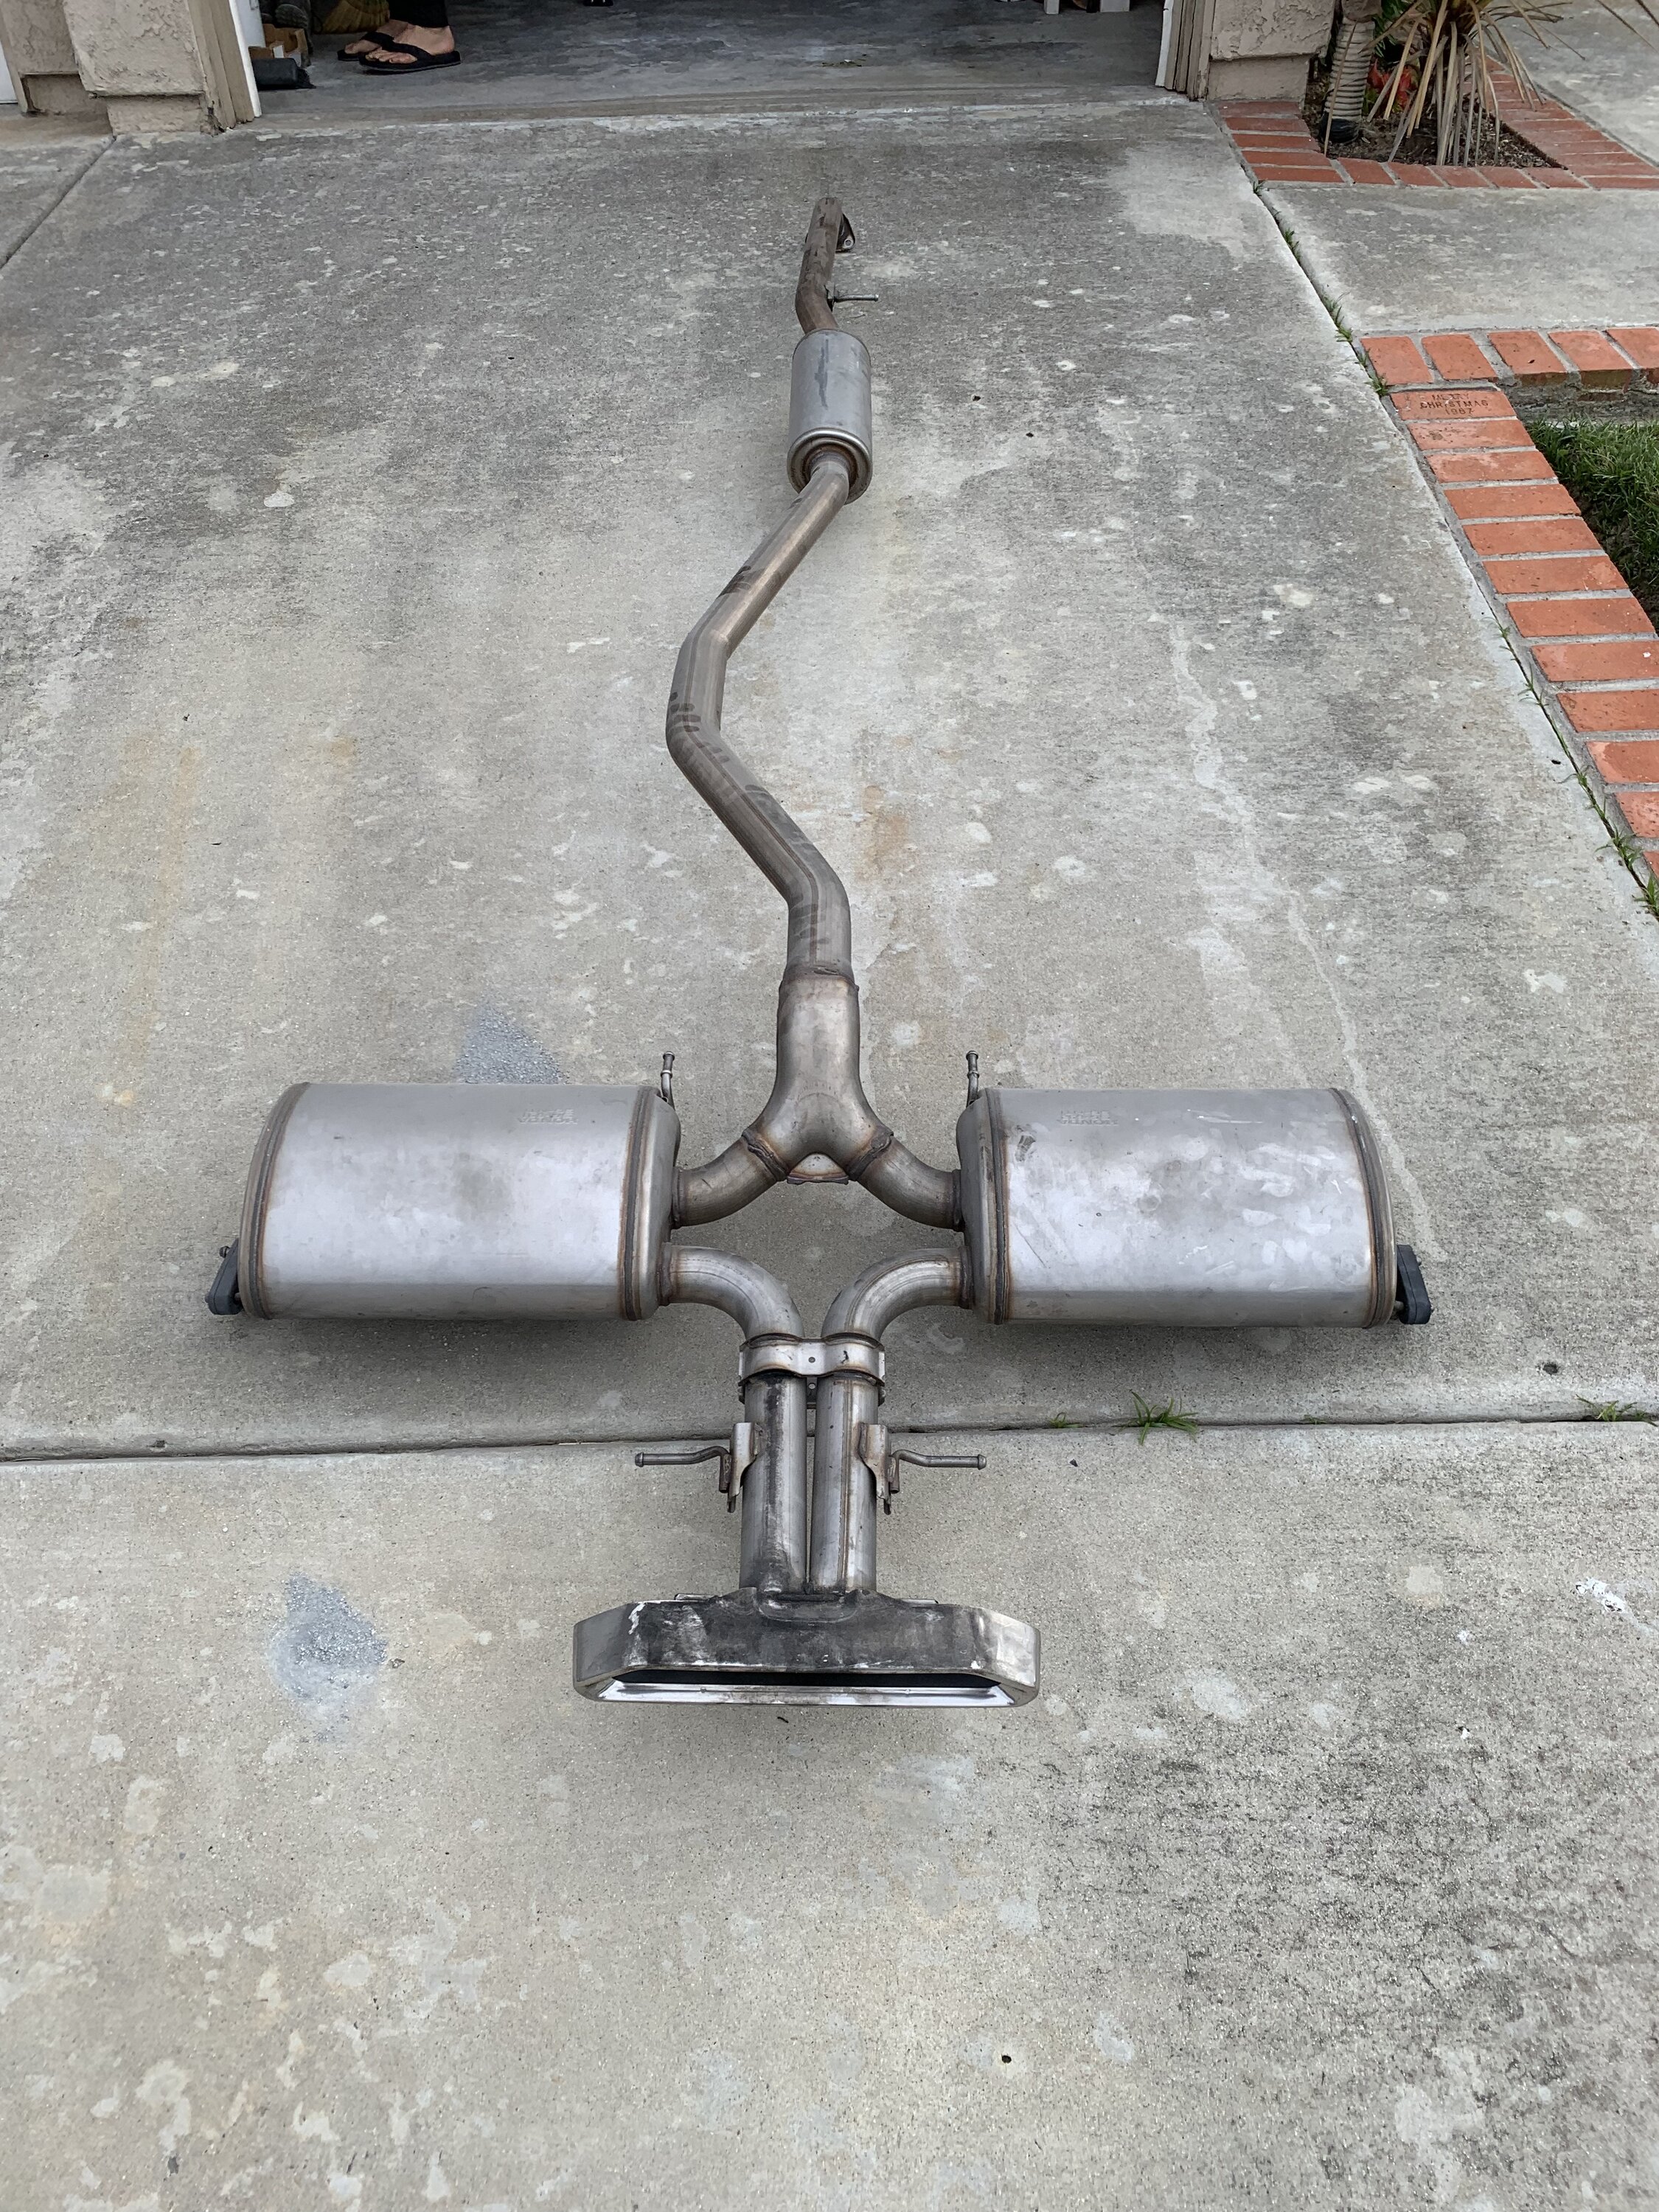 Honda Civic 10th gen OEM Civic Si Exhaust FOR SALE IMG_7656